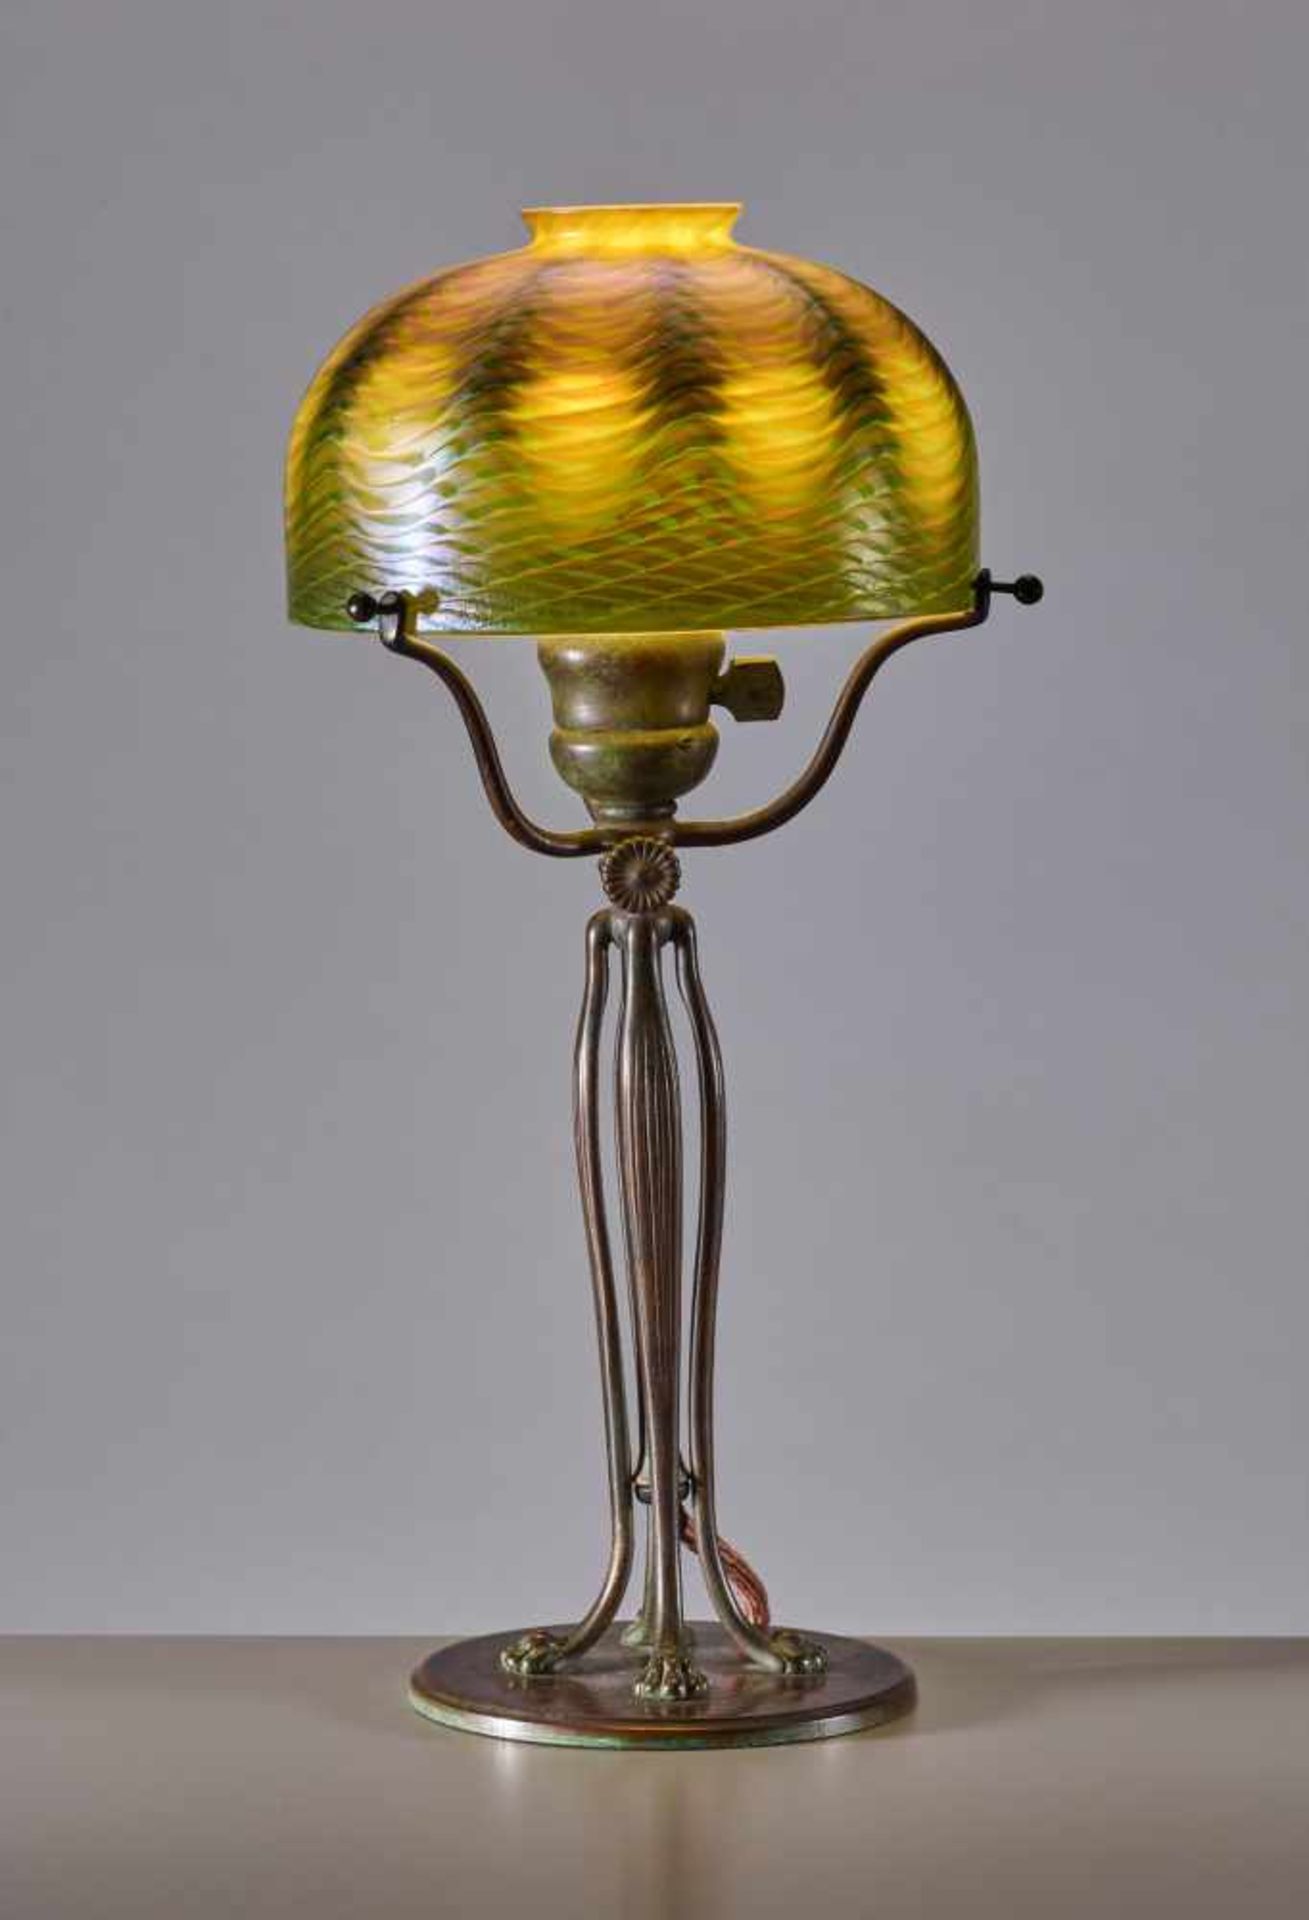 TIFFANY, FAVRILE TABLE LAMP, USA 1905Louis Comfort Tiffany (1848-1933) – American painter and - Image 9 of 10